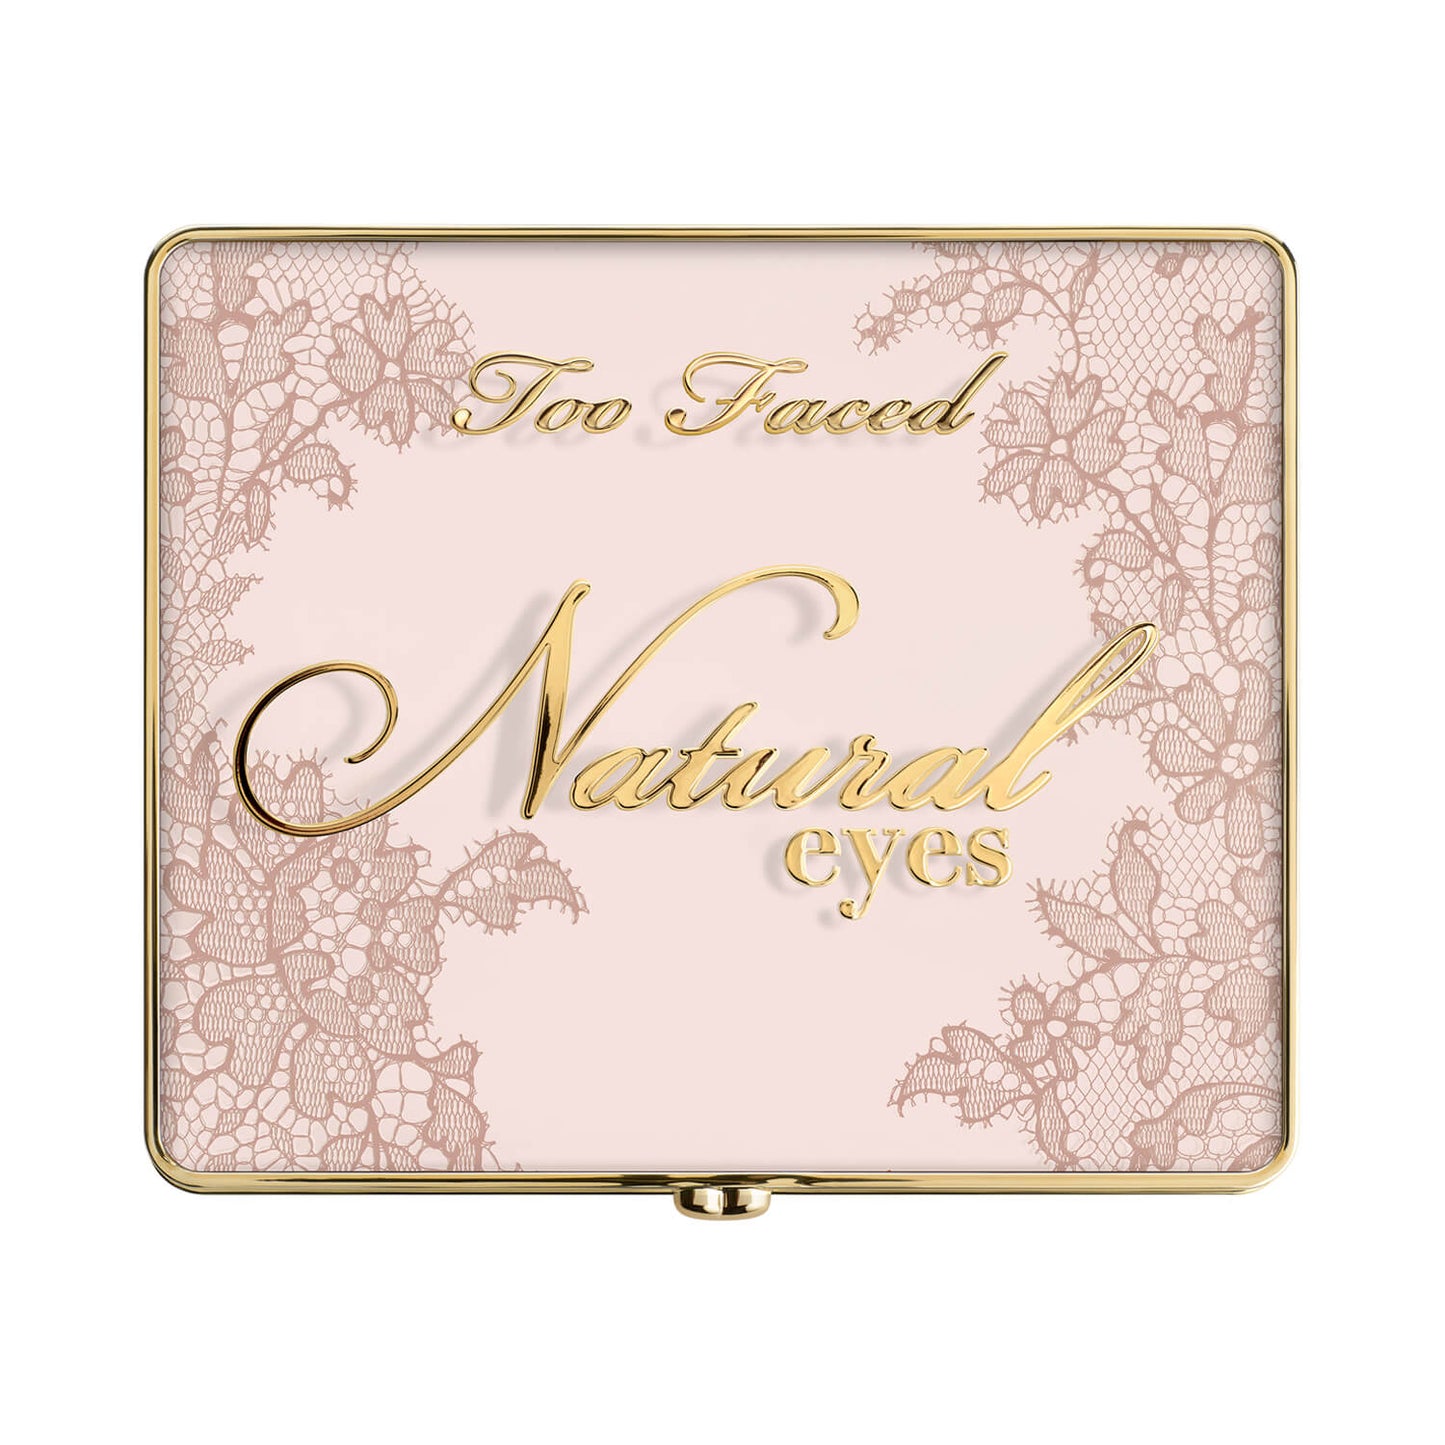 Too Faced Natural Eyes Neutral Eye Shadow Collection